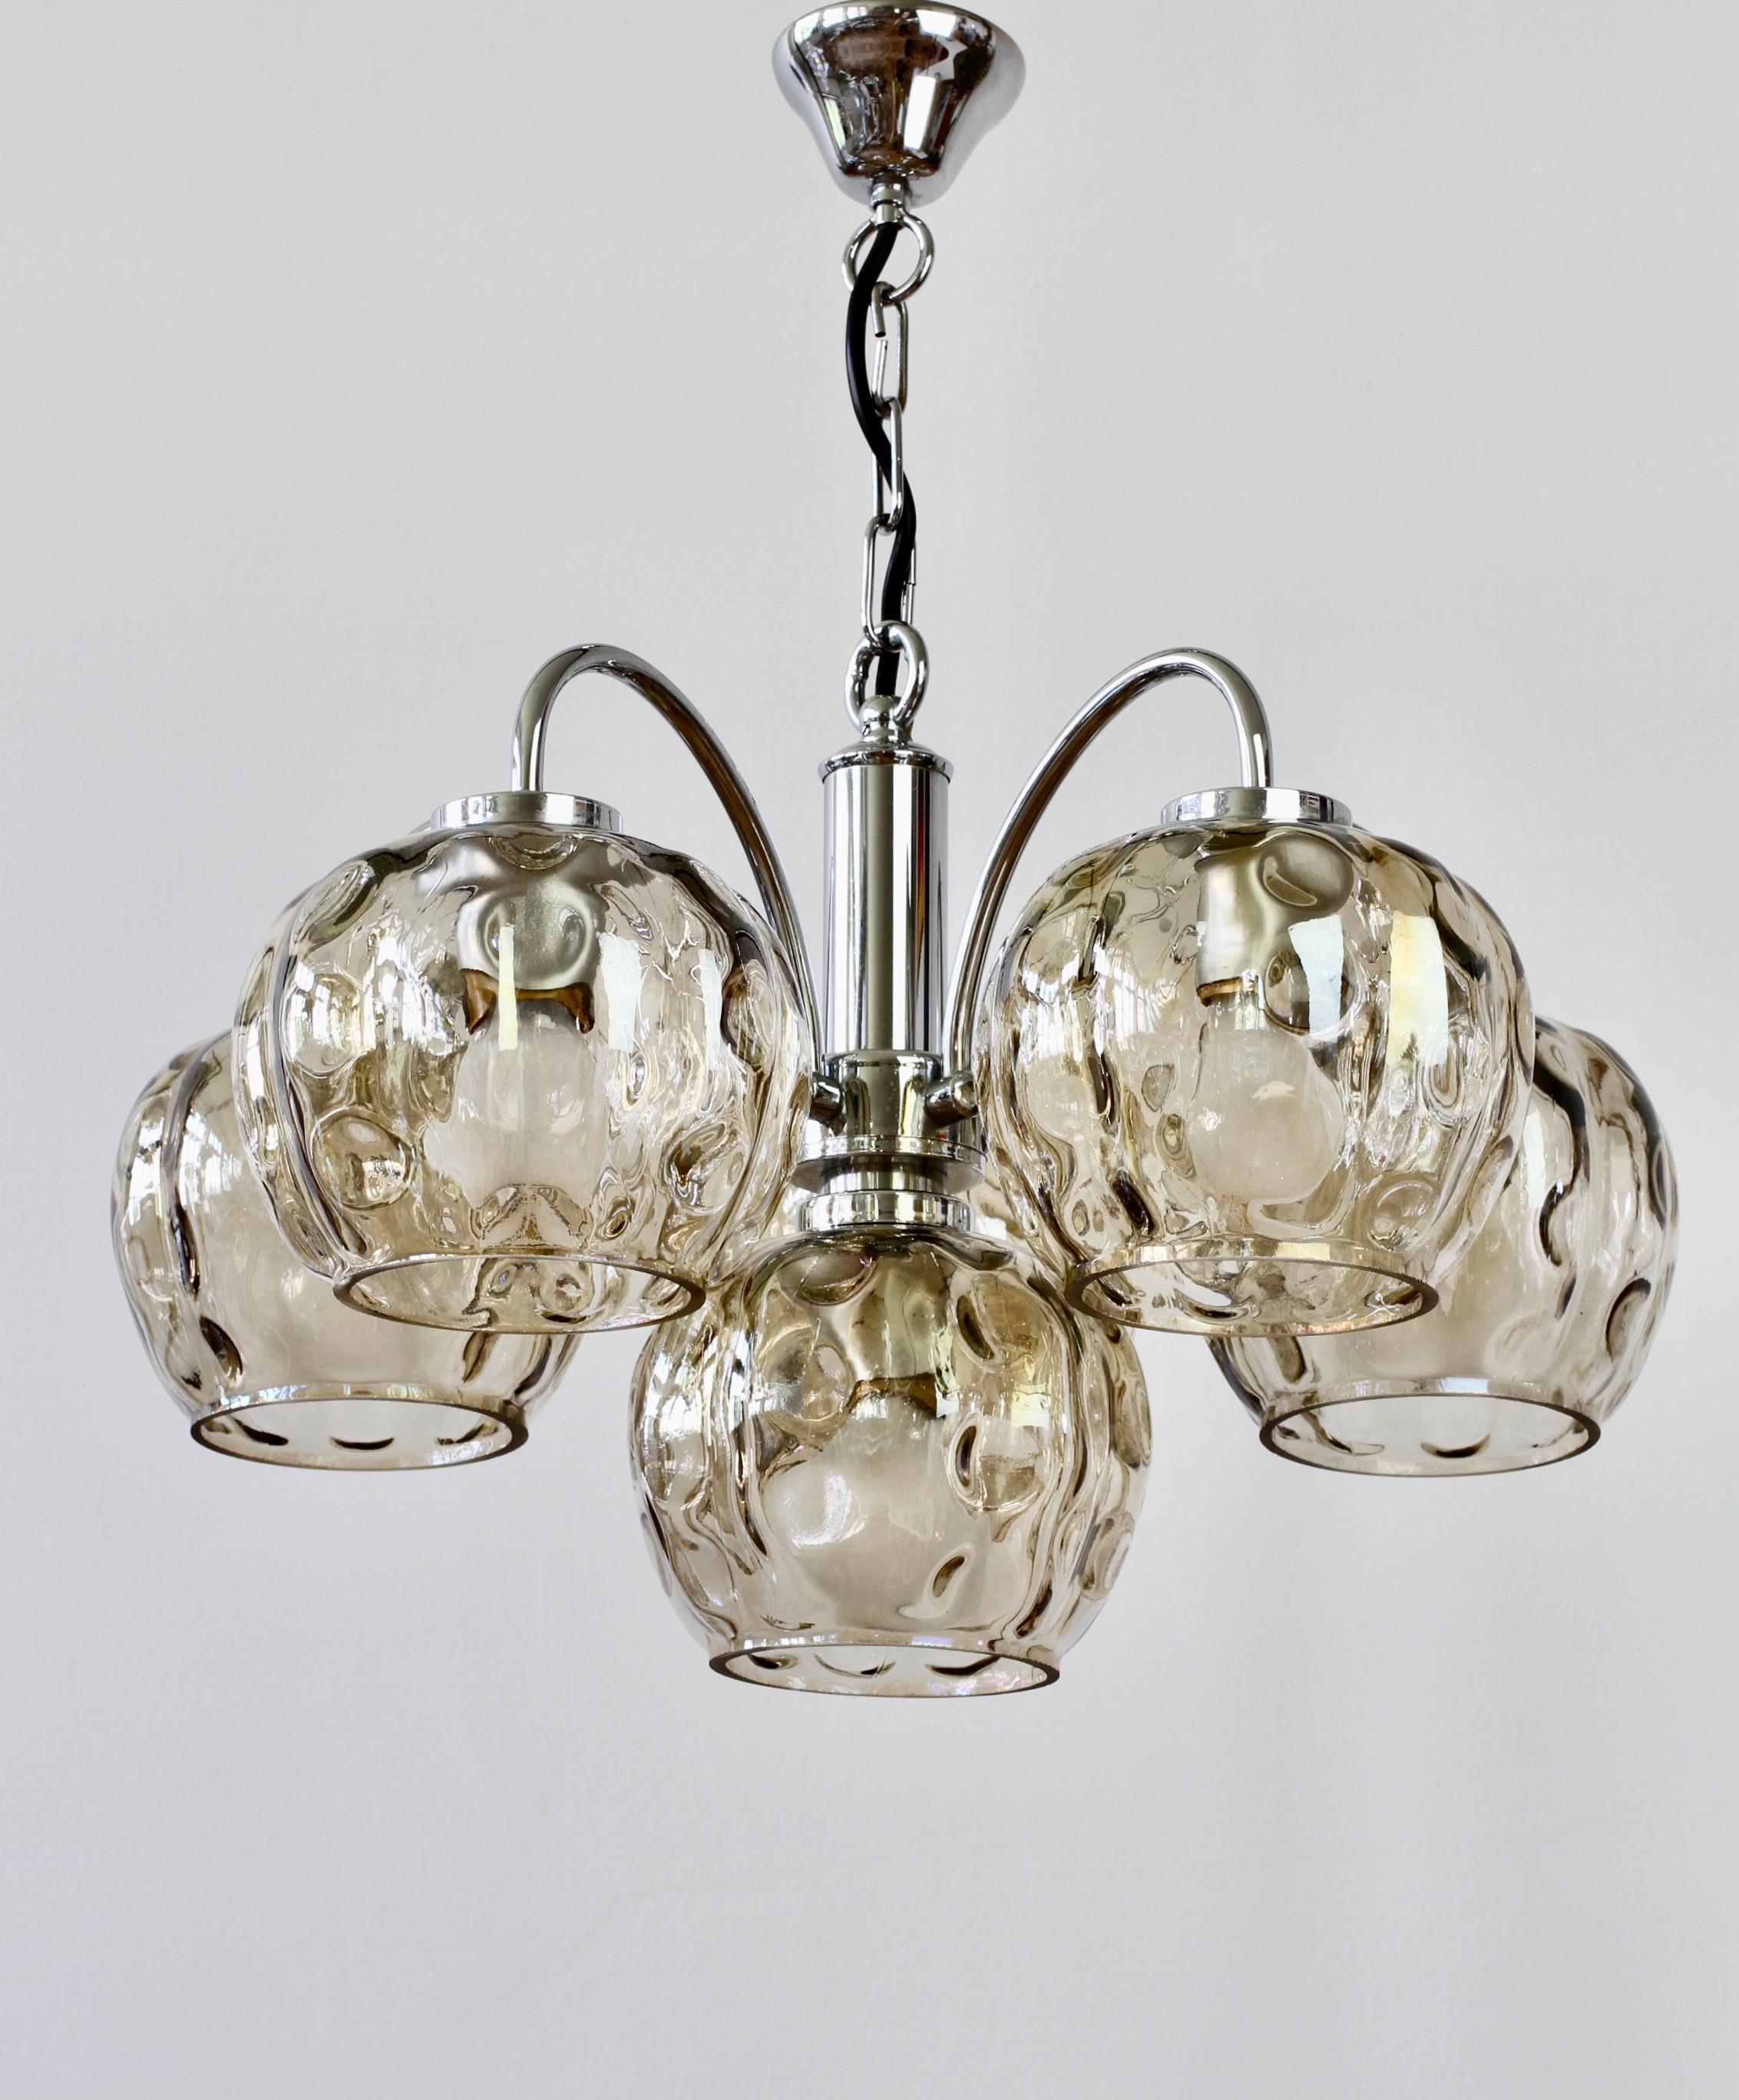 1970s Vintage Six Arm Chrome Chandelier with Smoked Toned 